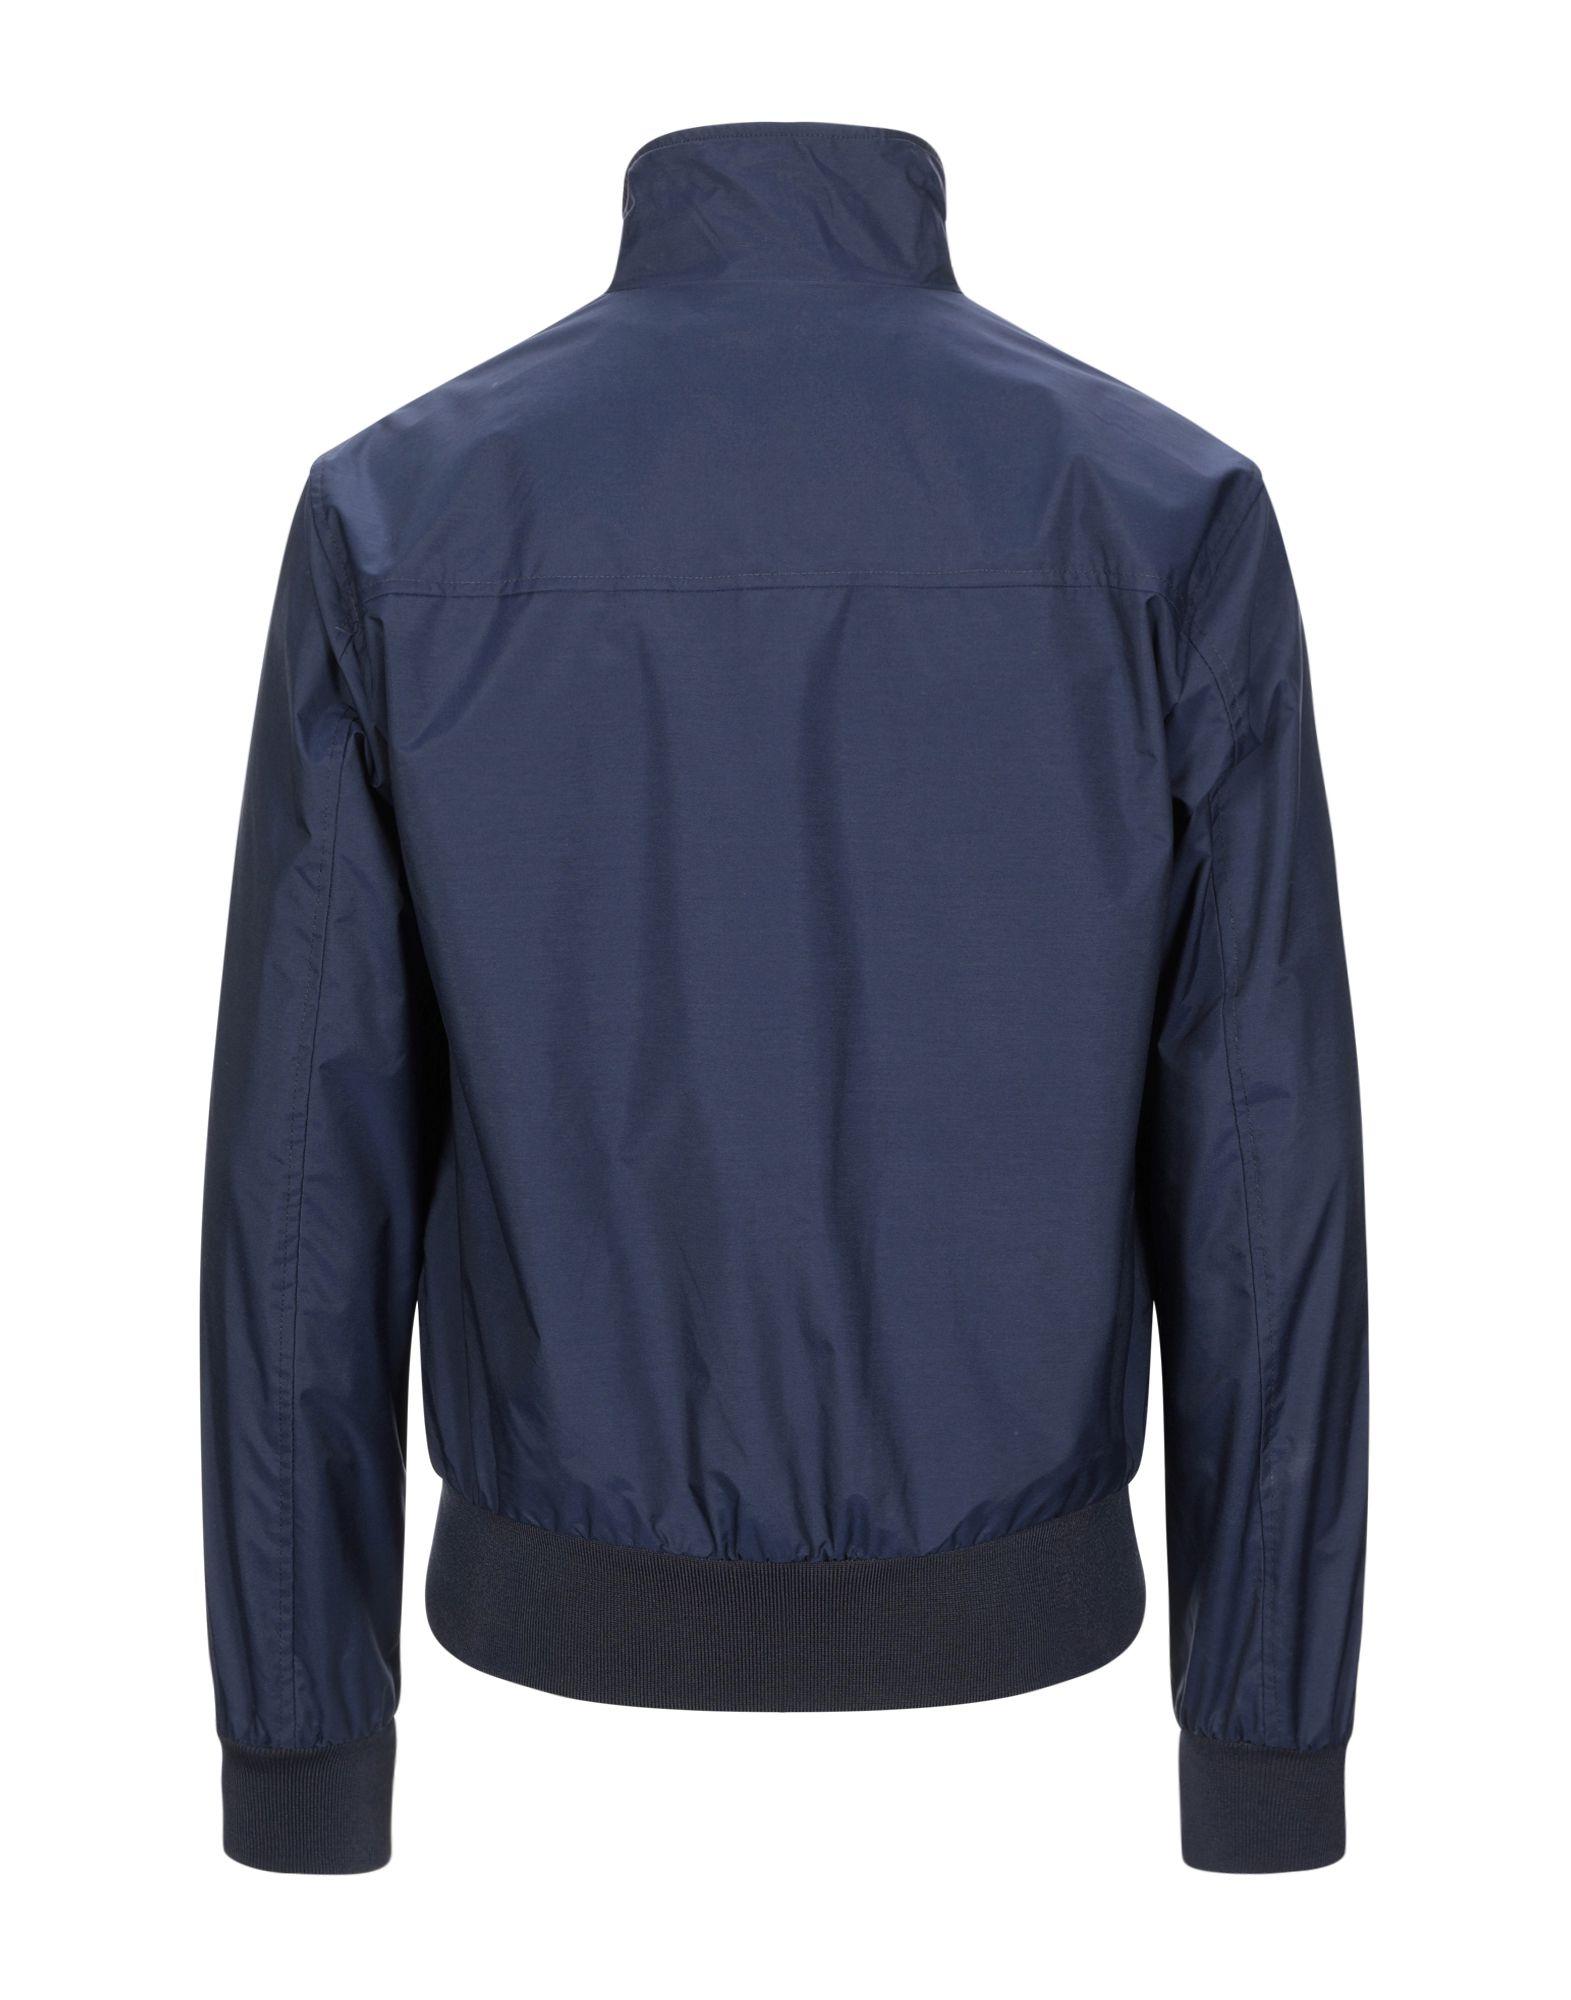 North Sails Synthetic Jacket in Dark Blue (Blue) for Men - Save 71% - Lyst